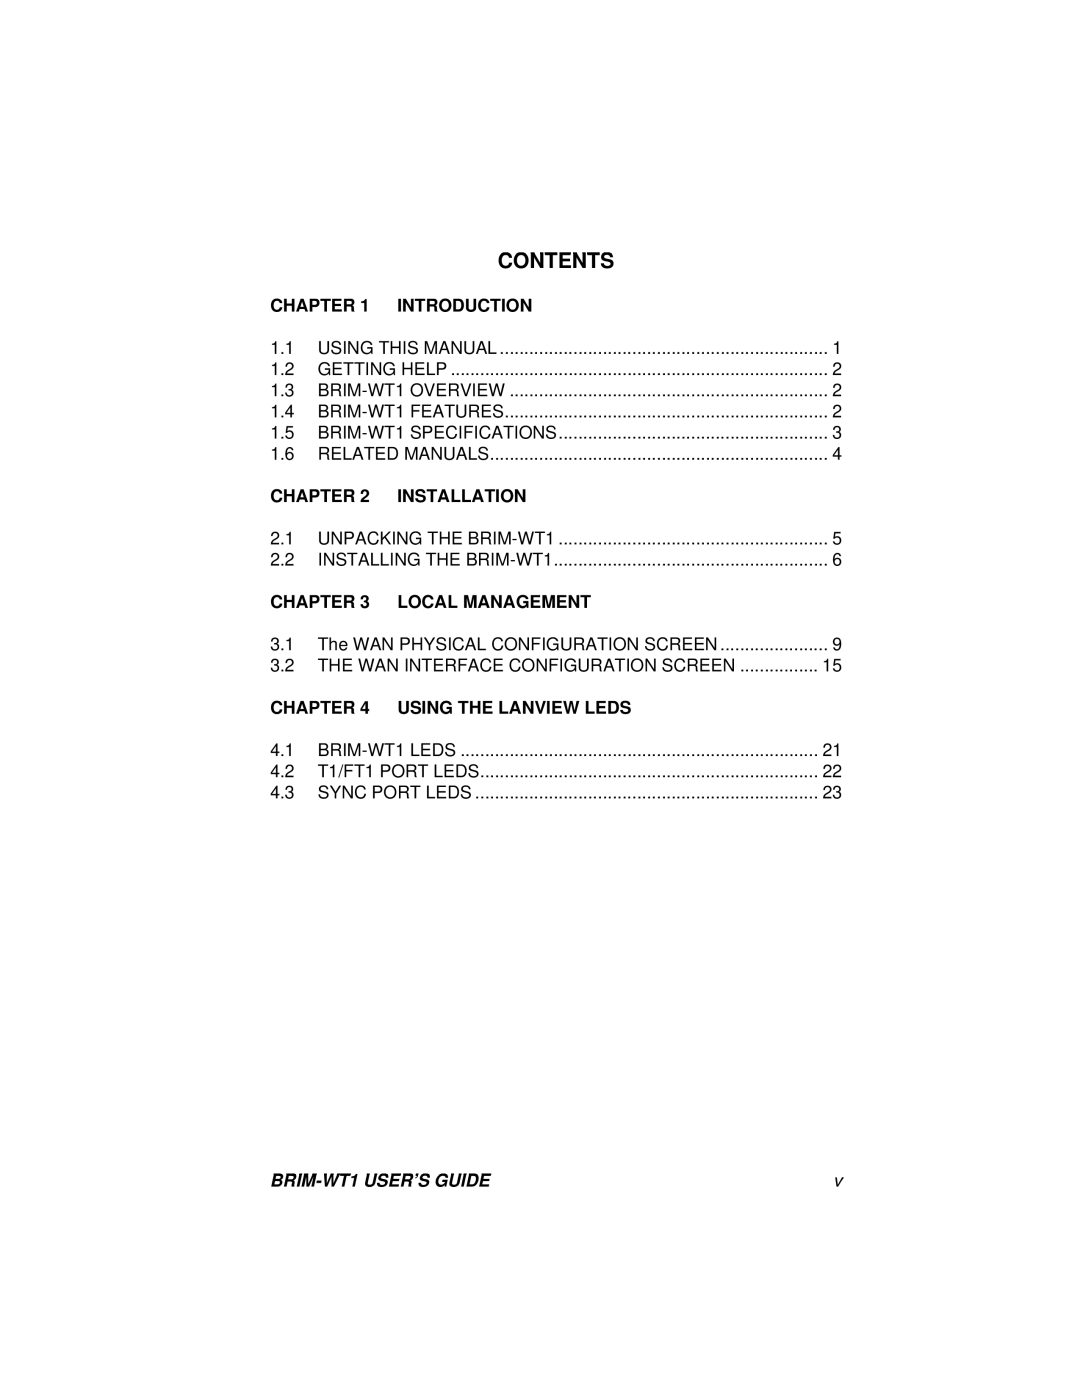 Cabletron Systems BRIM-WT1 manual Contents, Introduction, Chapter, Installation, Local Management, Using The Lanview Leds 